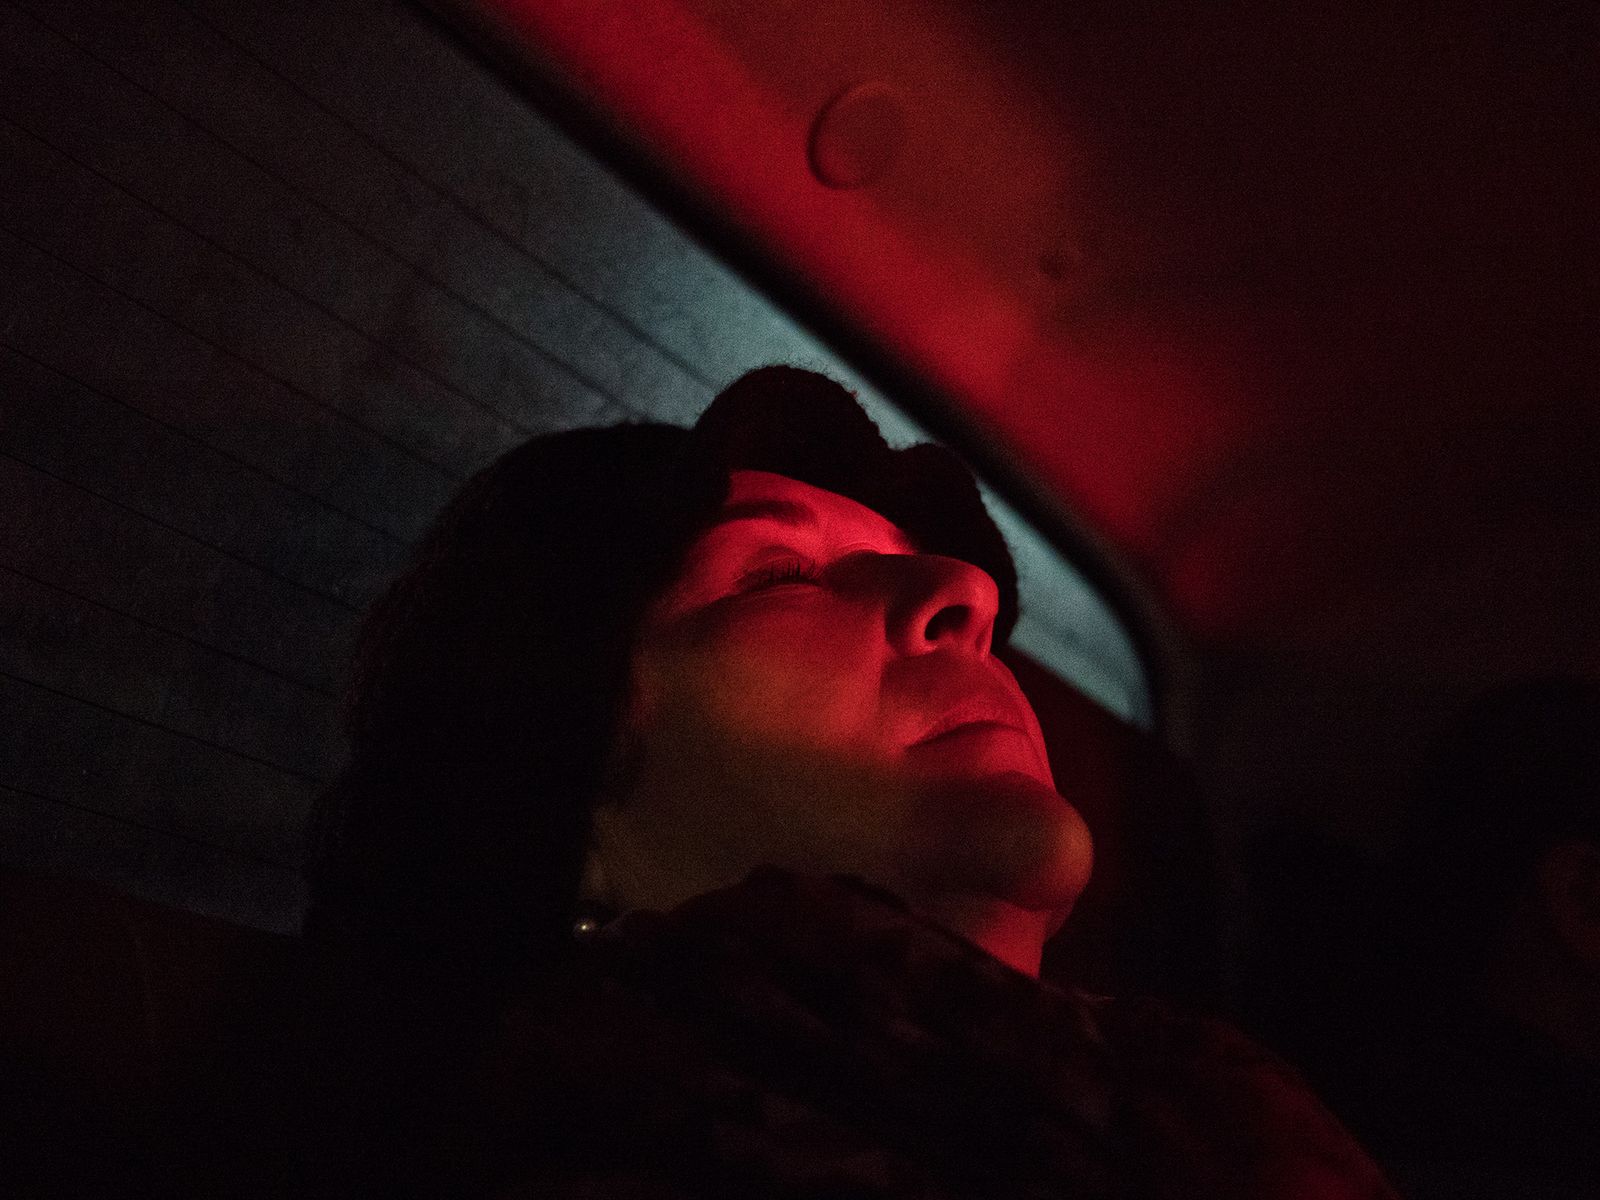 © Isabella Lanave - Curitiba, Brazil. April, 2017. My mother in crisis in my uncle’s car. We were getting her to a clinic.